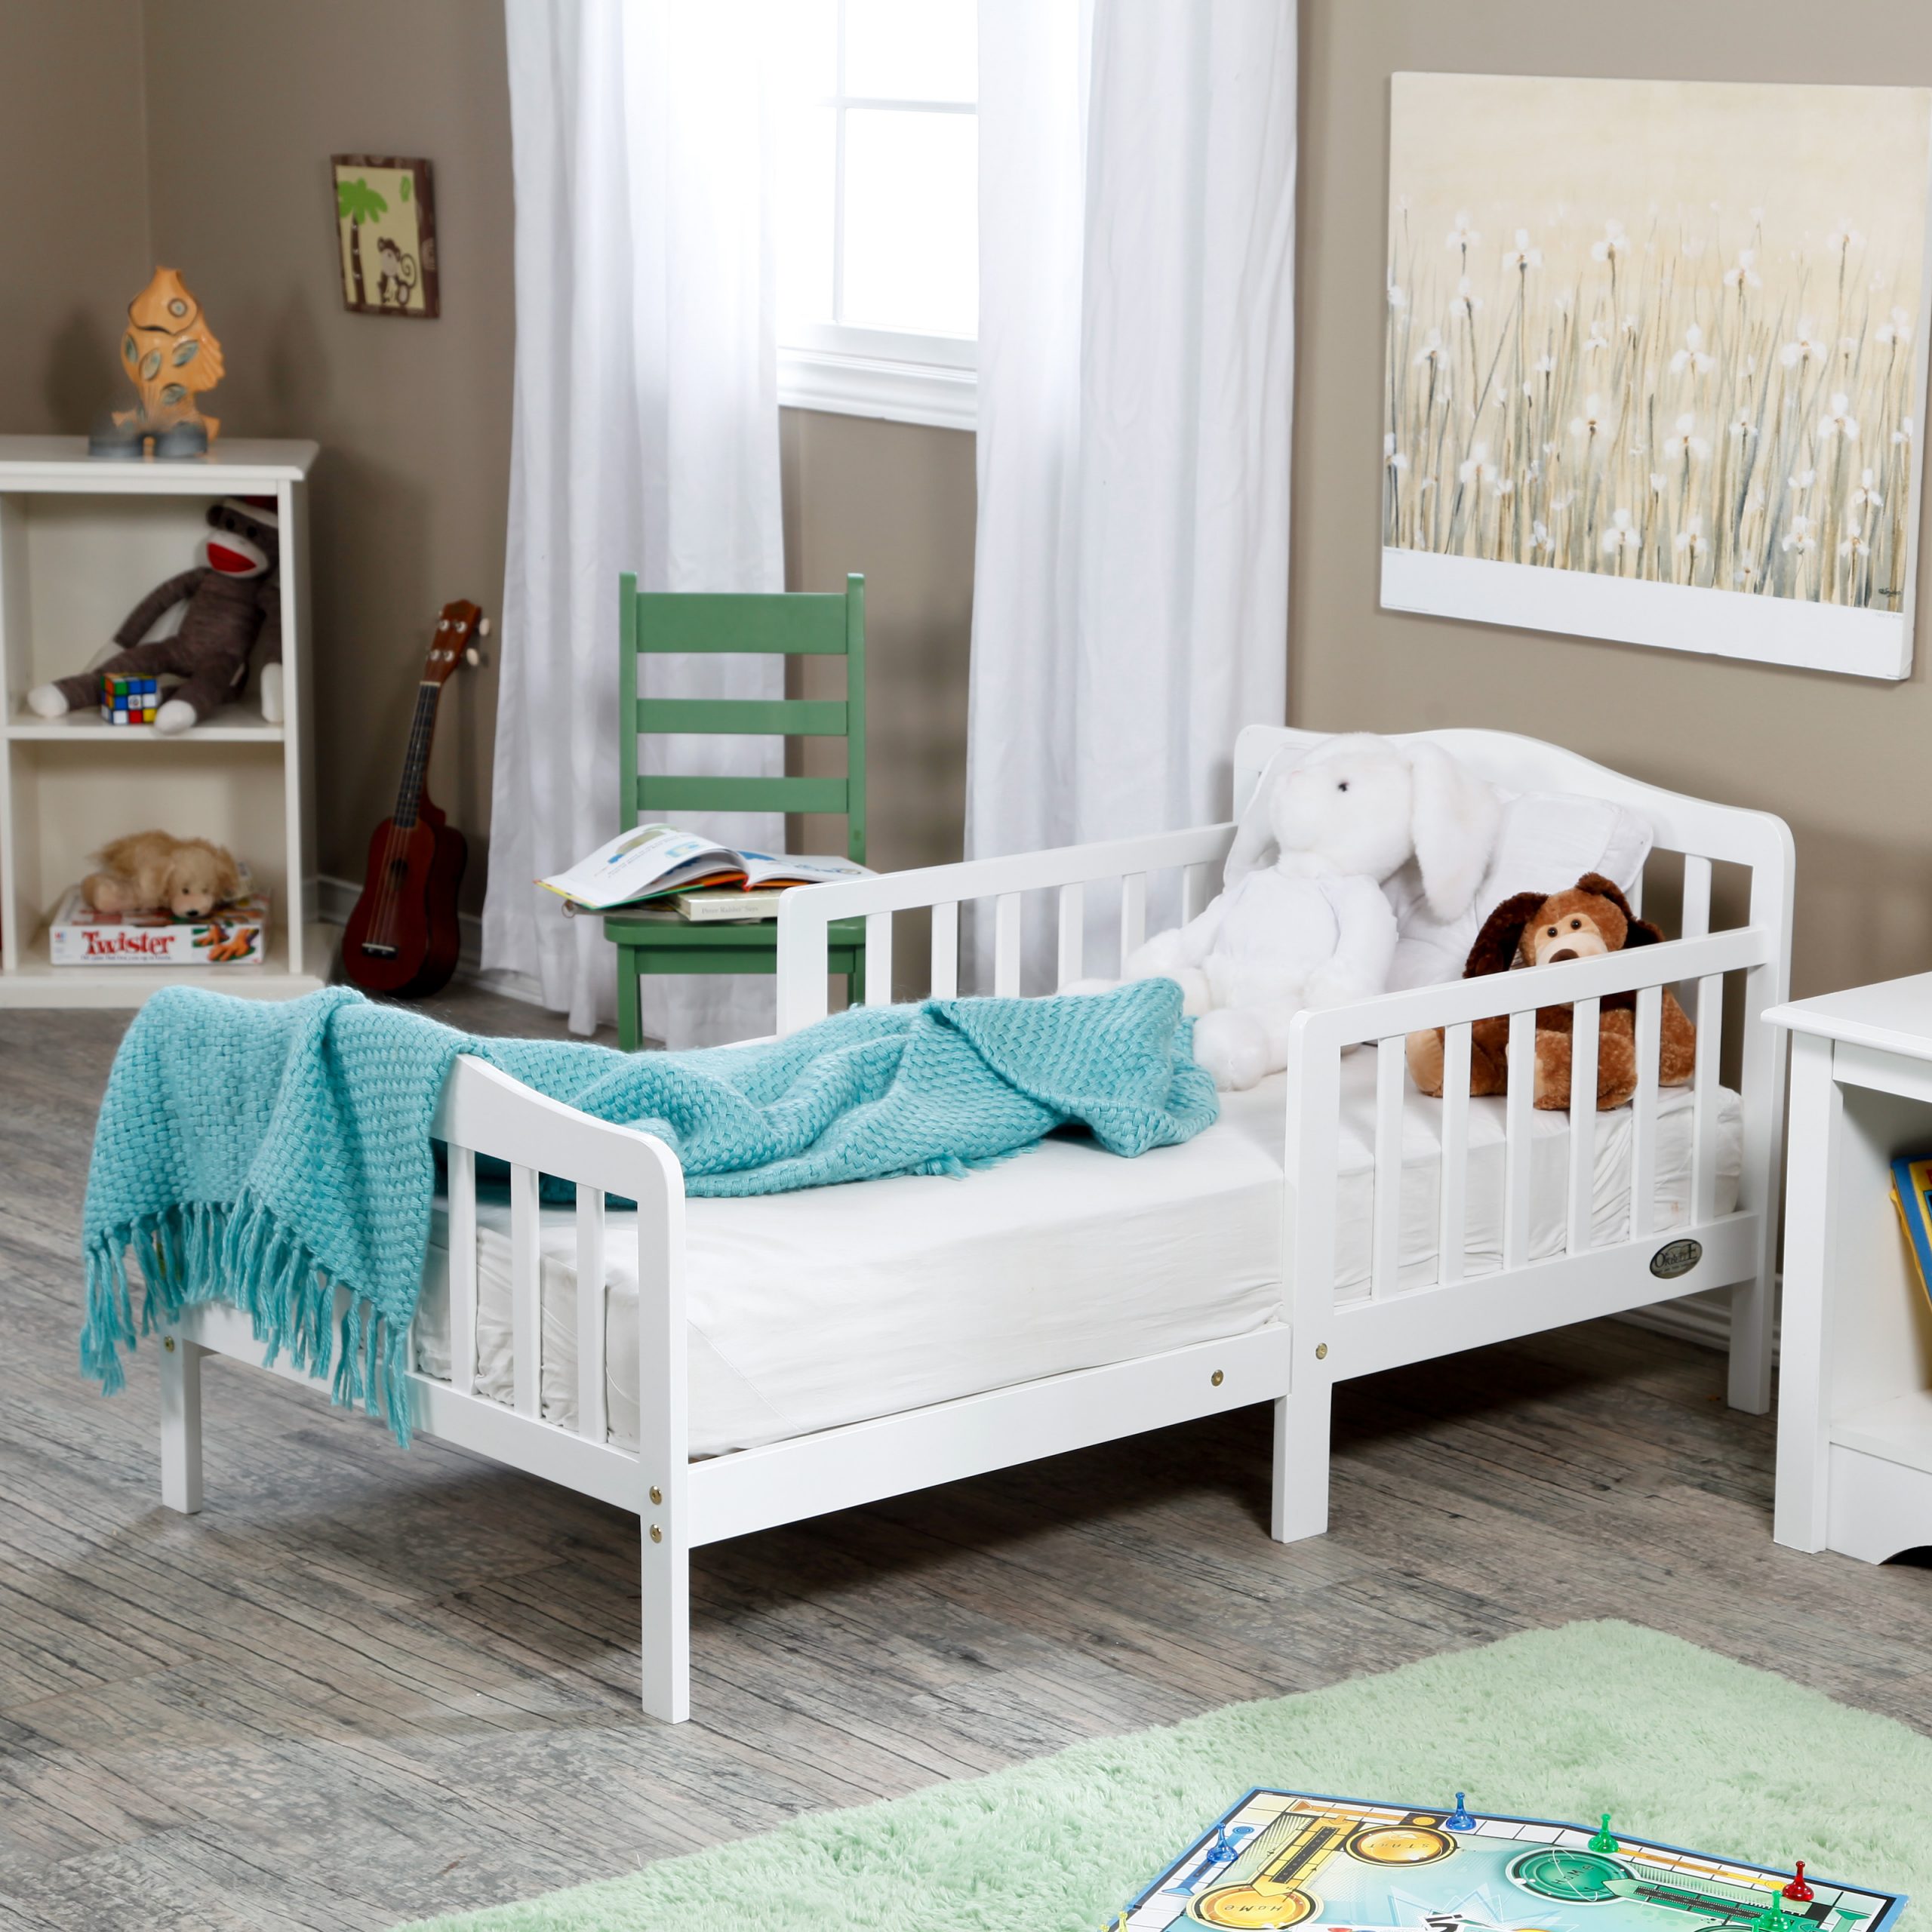 The Orbelle Contemporary Solid Wood Toddler Bed